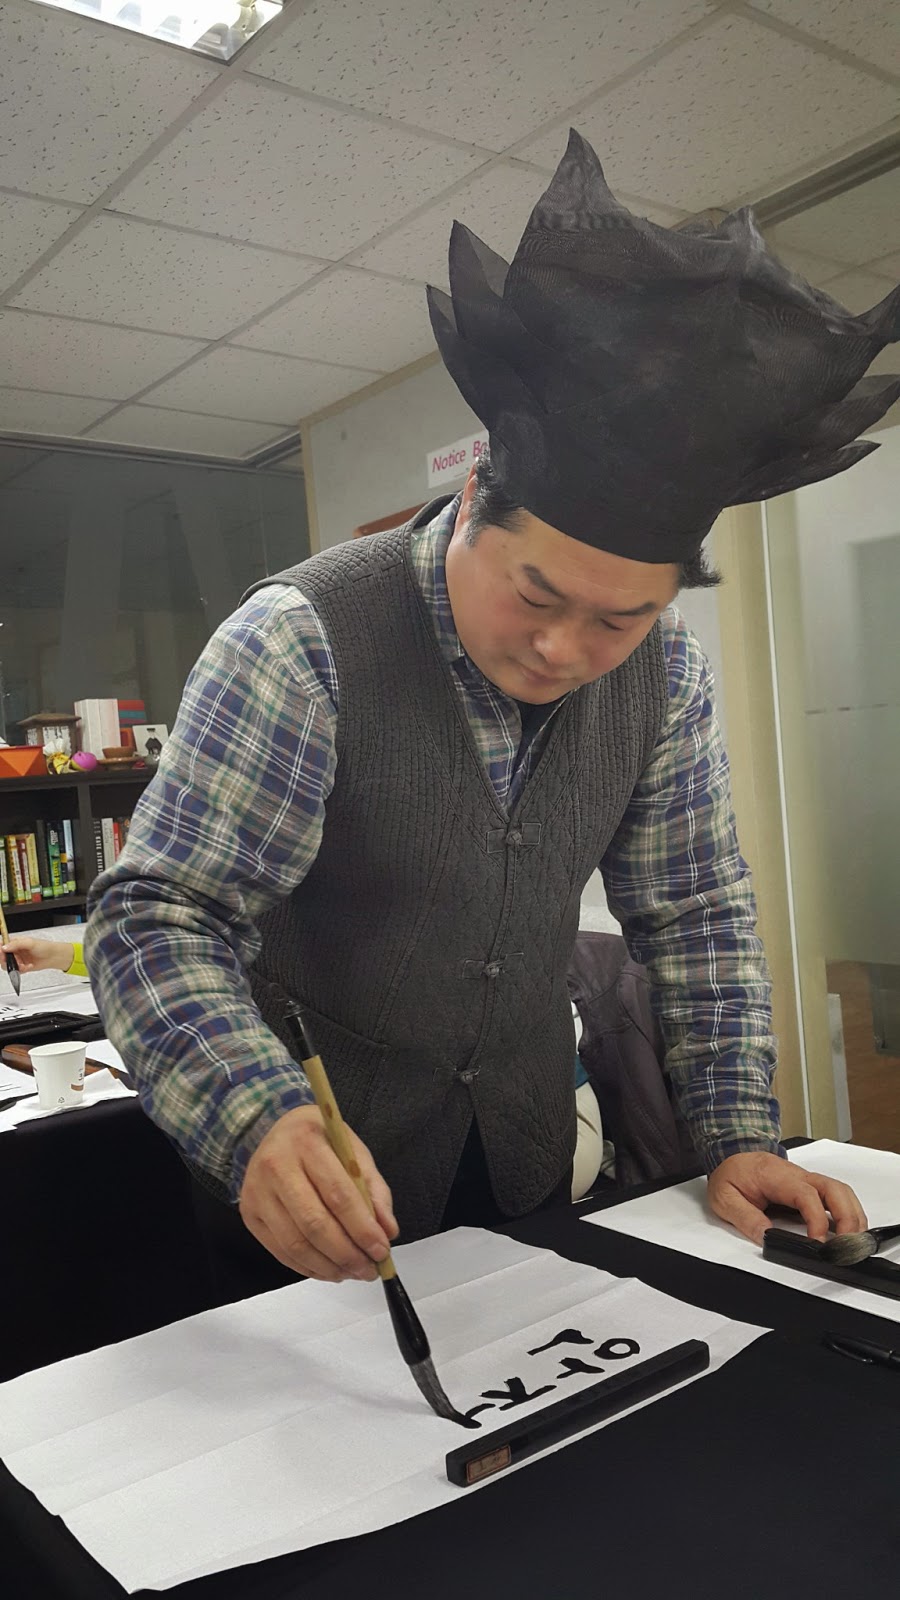 Korean calligraphy done by the expert